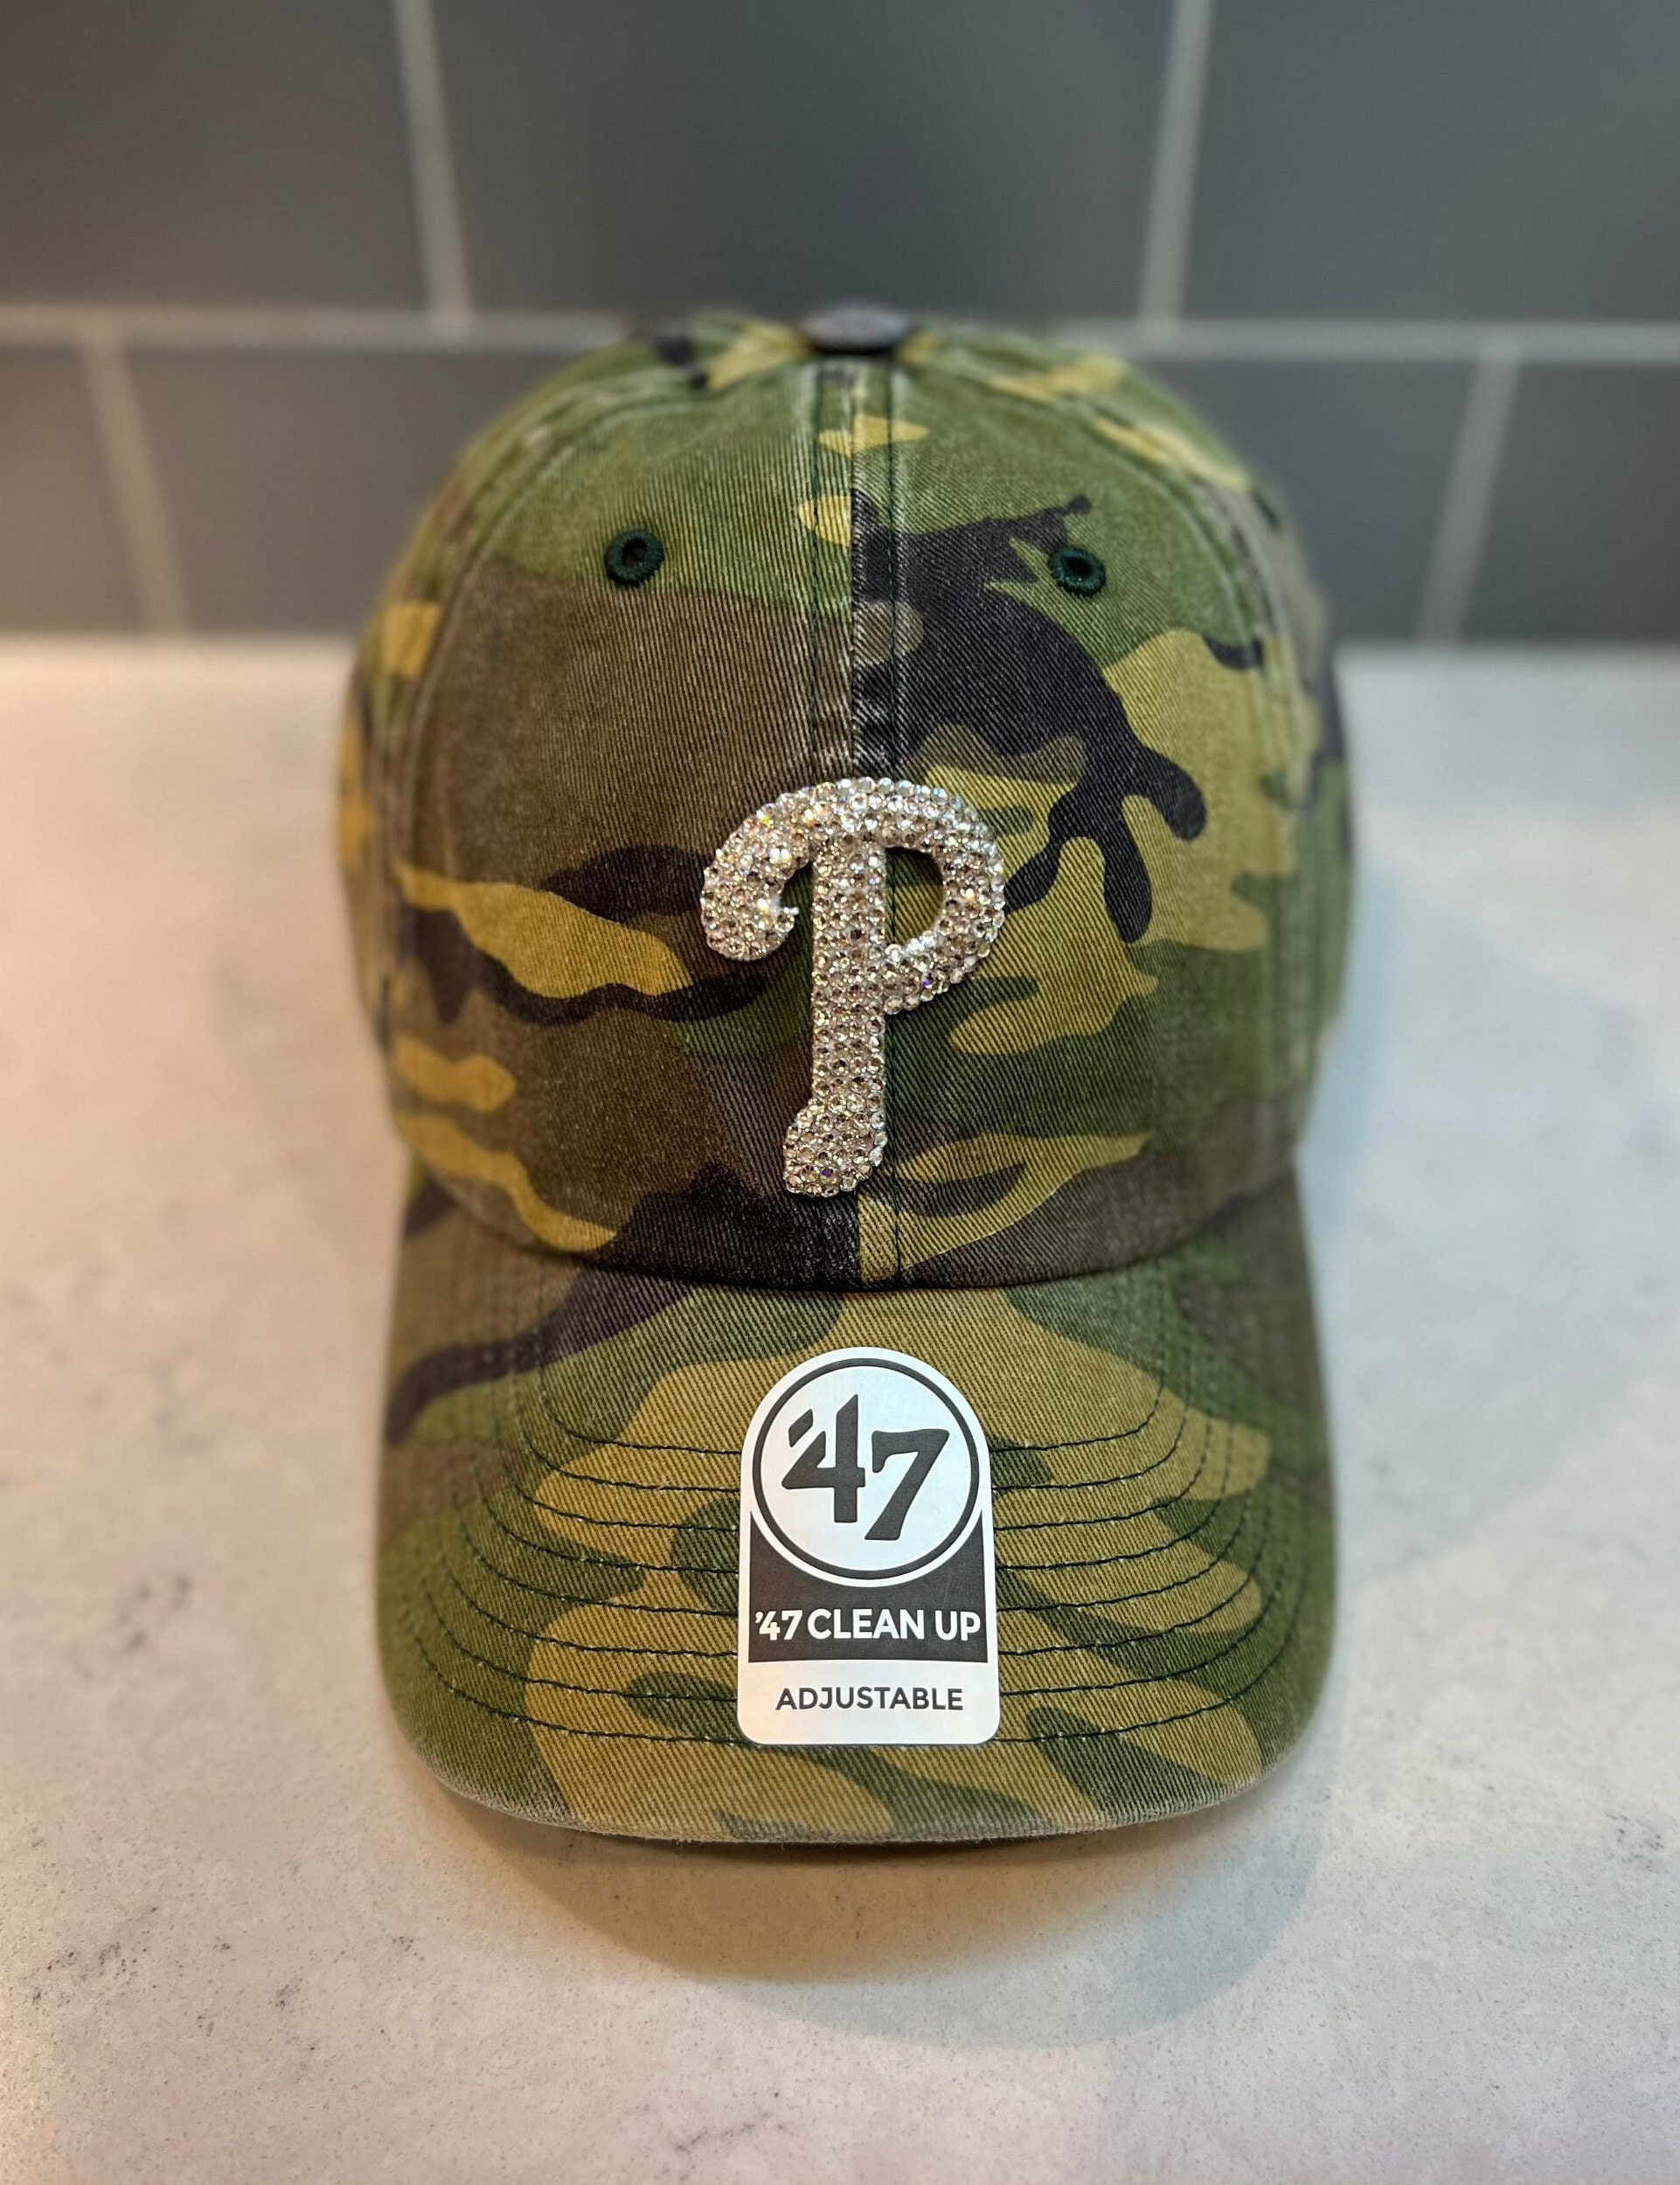 47 MLB Camo Clean Up Adjustable Hat, Adult One Size Fits All (San Diego Padres Camo)